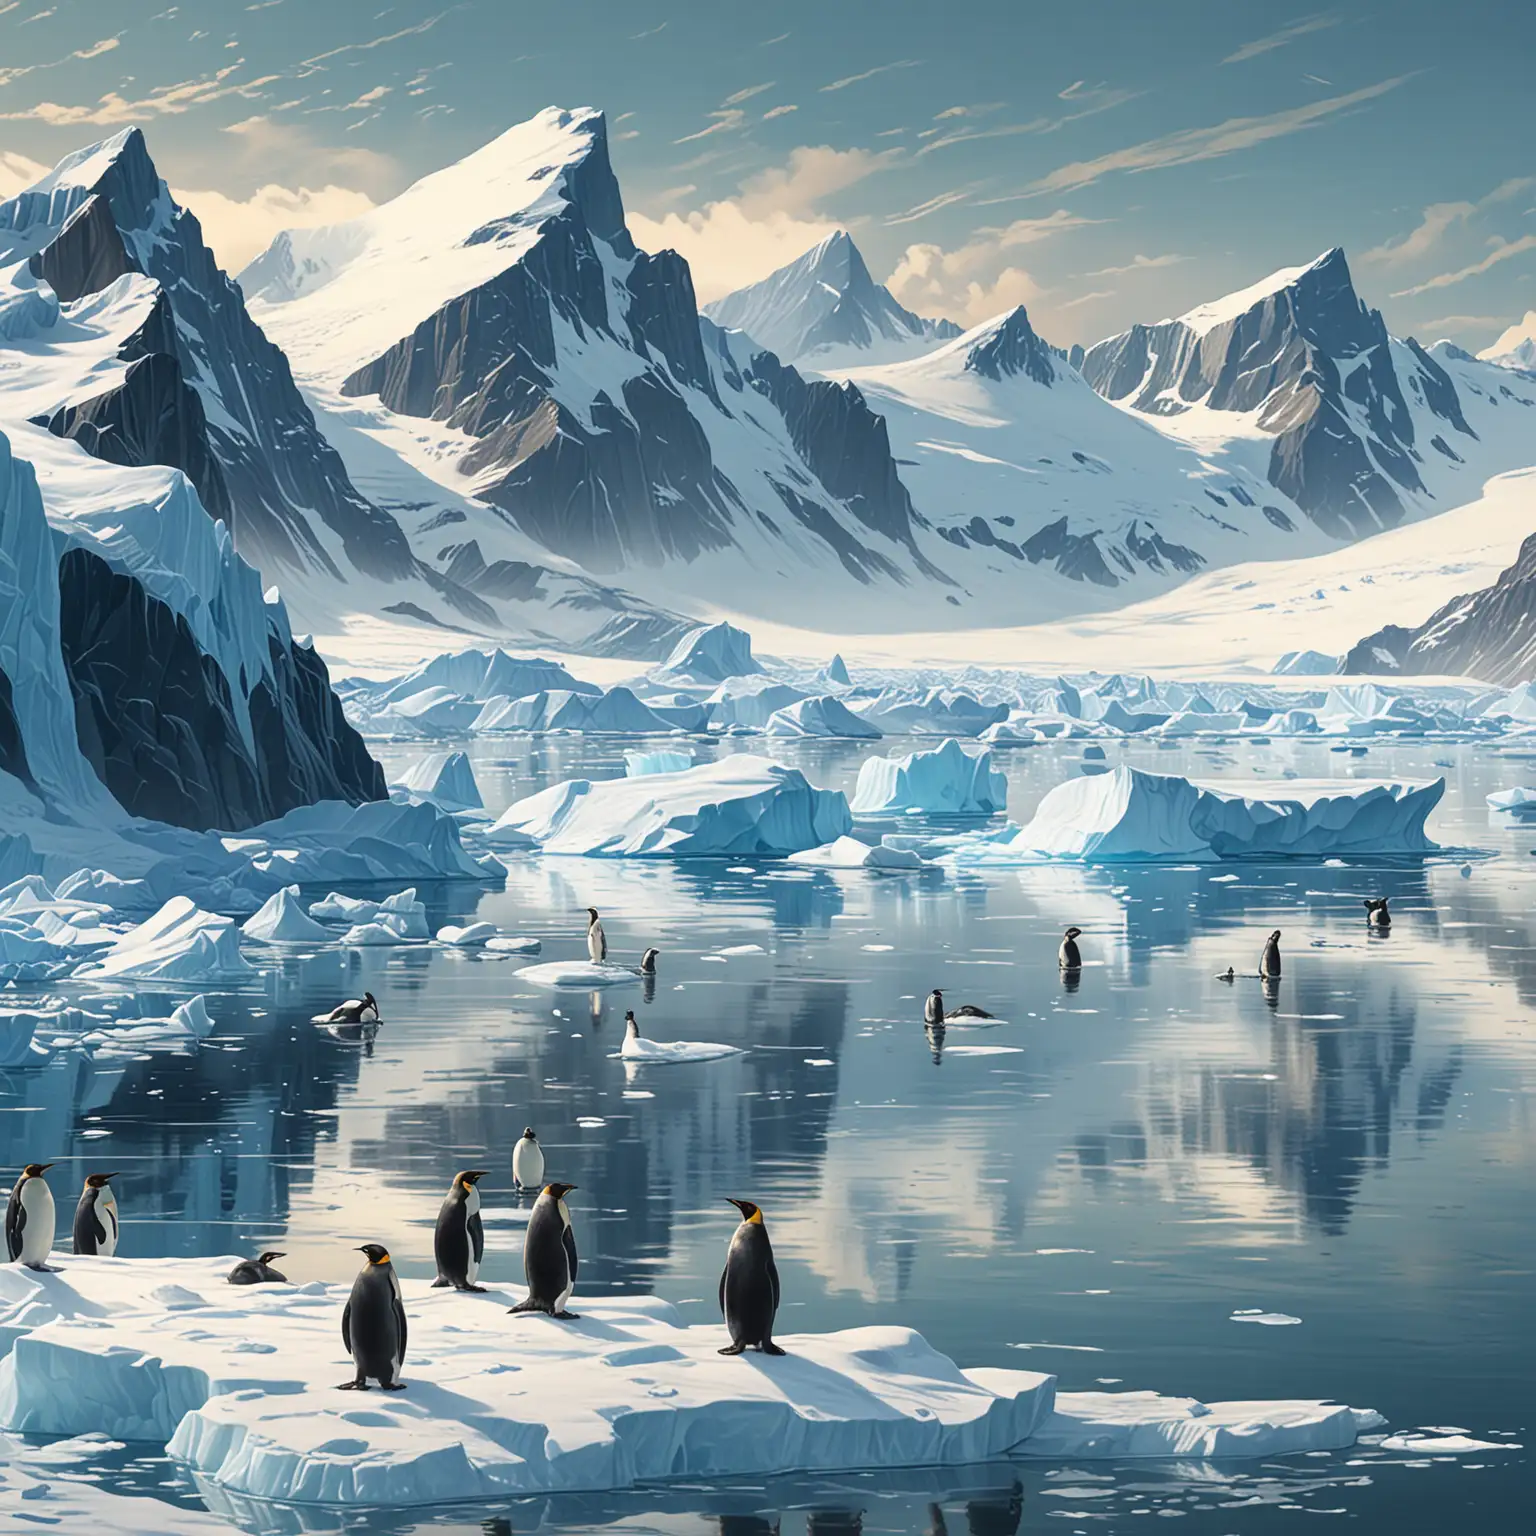 Majestic Icebergs and Penguin Colonies on the Antarctic Peninsula